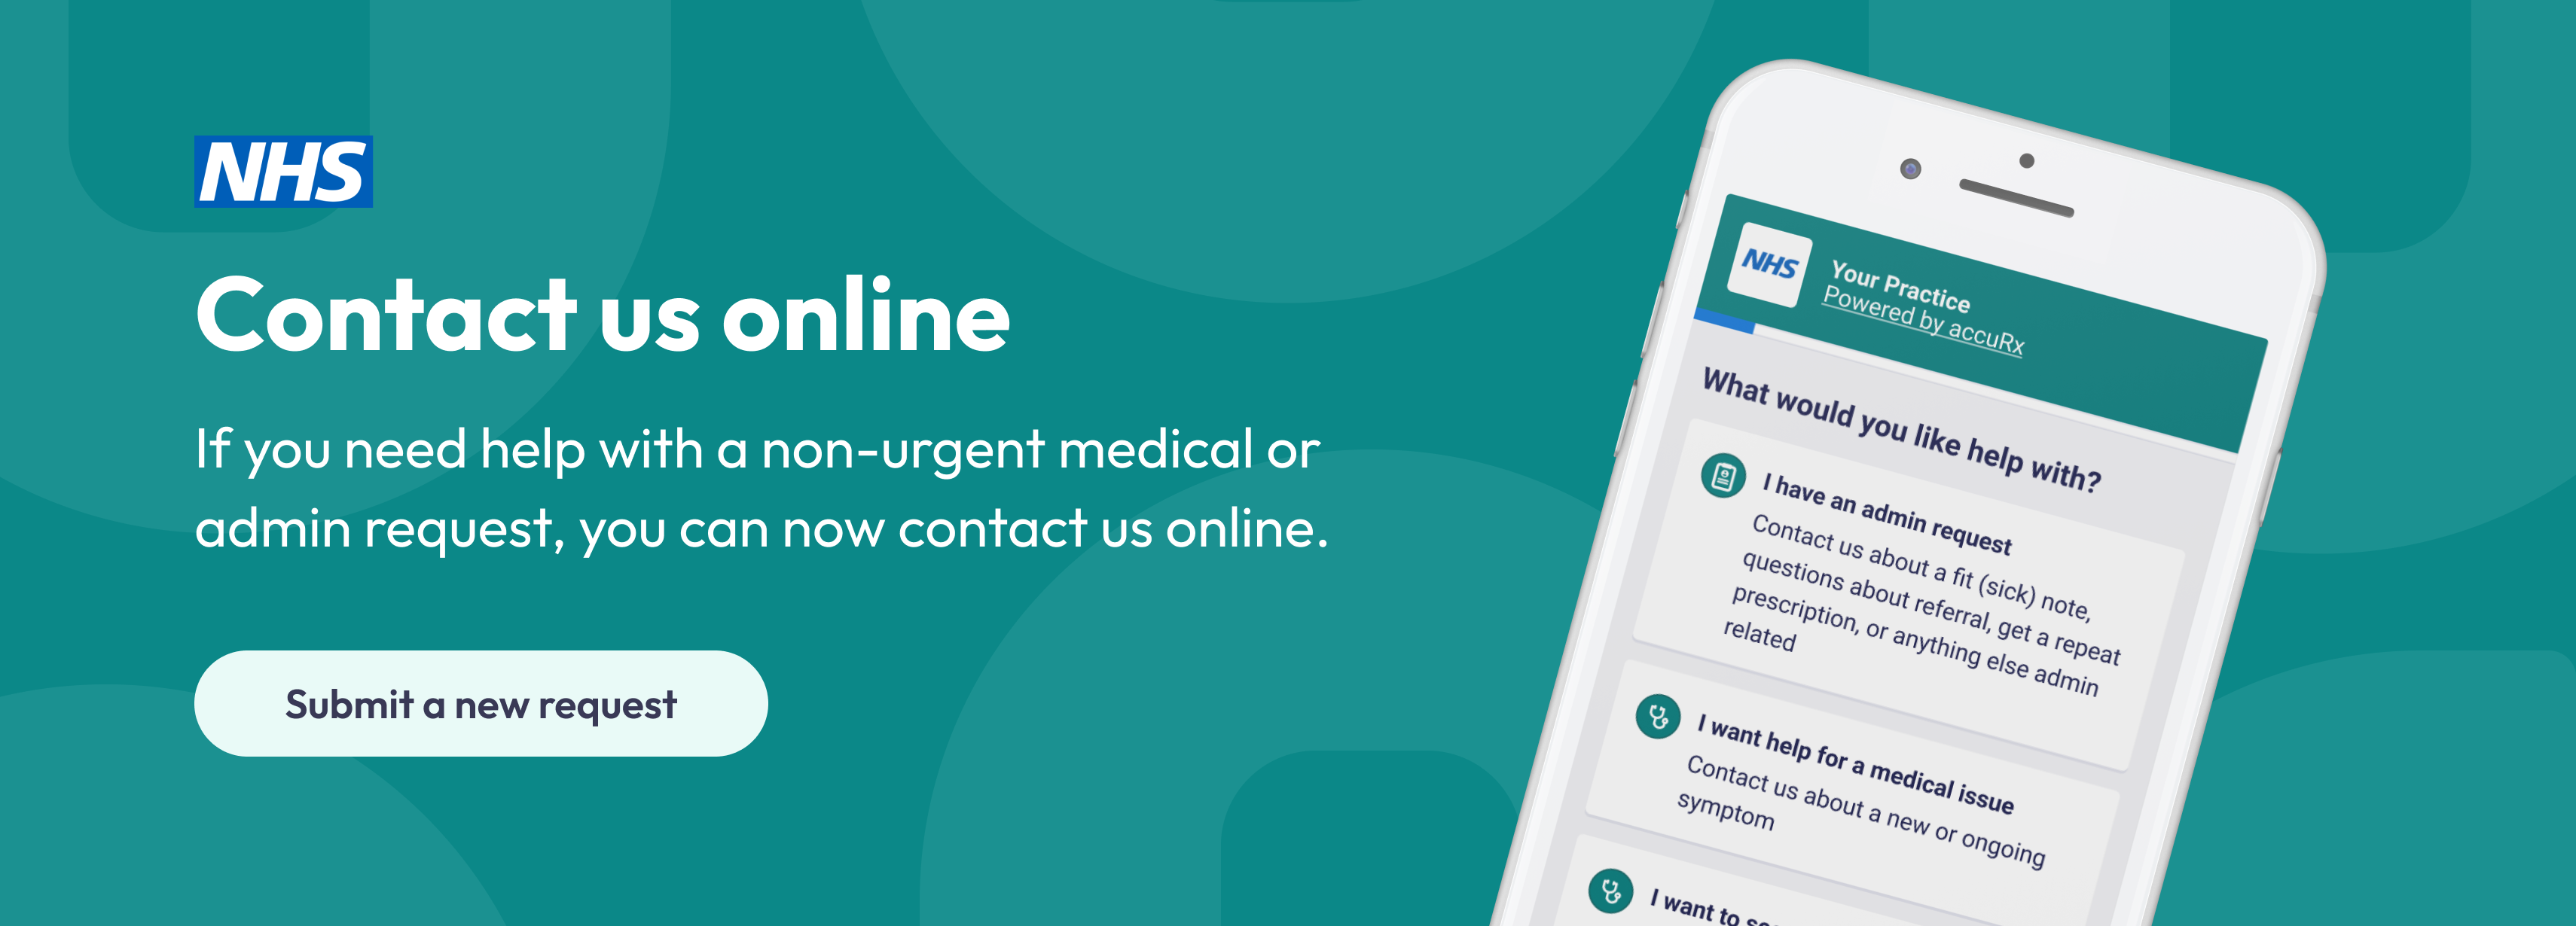 Contact us online if you need help with a non-urgent medical or admin request